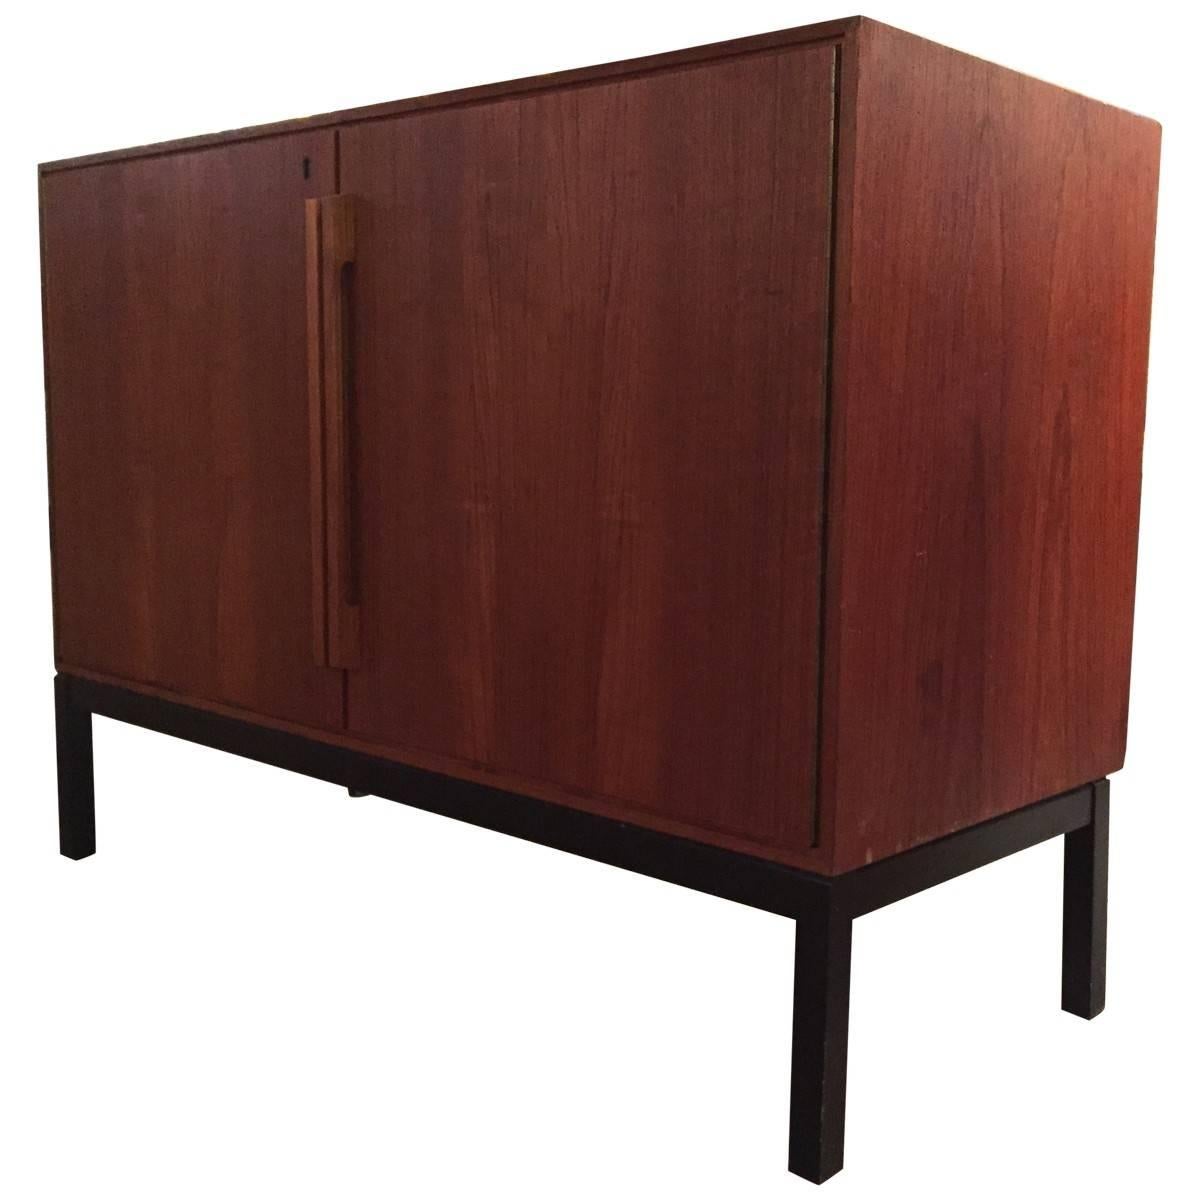 Midcentury emblematic of the craftsmanship and efficient design that defines Danish Mid-Century Modern furniture, this sleek bar cabinet adds the perfect stylish touch to any living space. As a convenient bonus, the piece also includes a perfectly